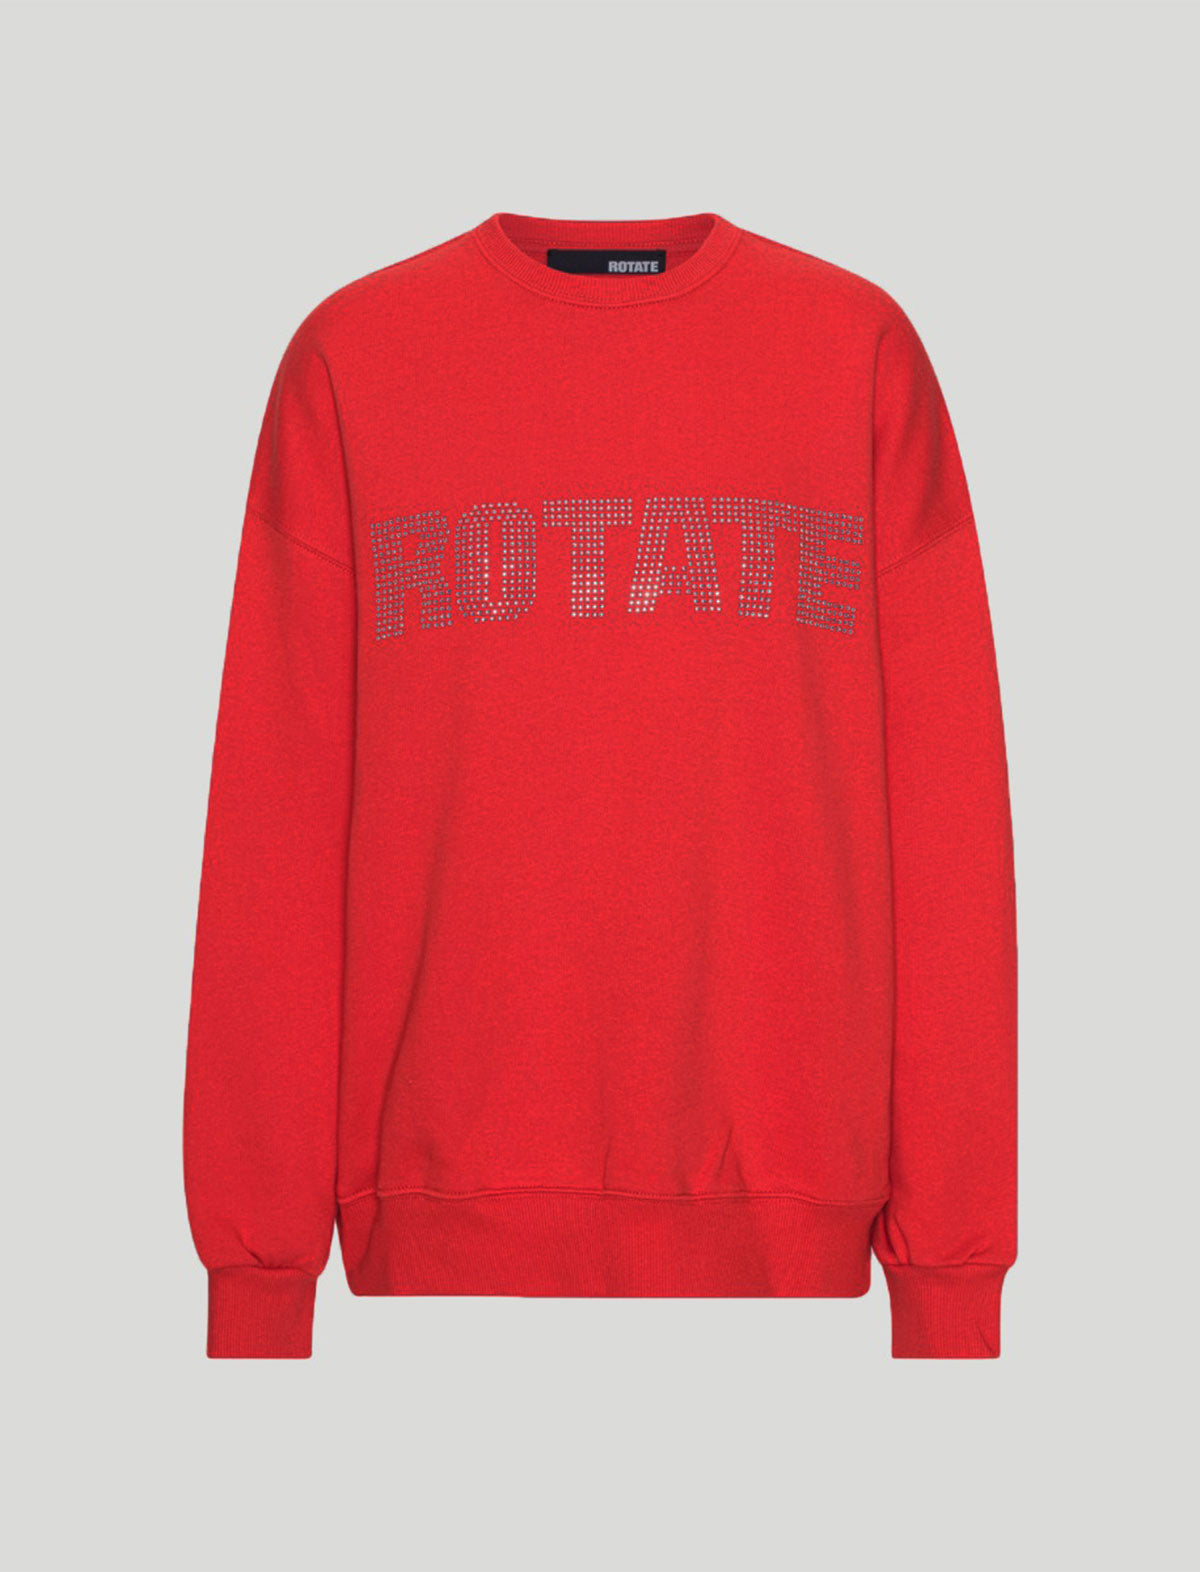 ROTATE SUNDAY 6 Crystal Crewneck Sweater in Fiery Red